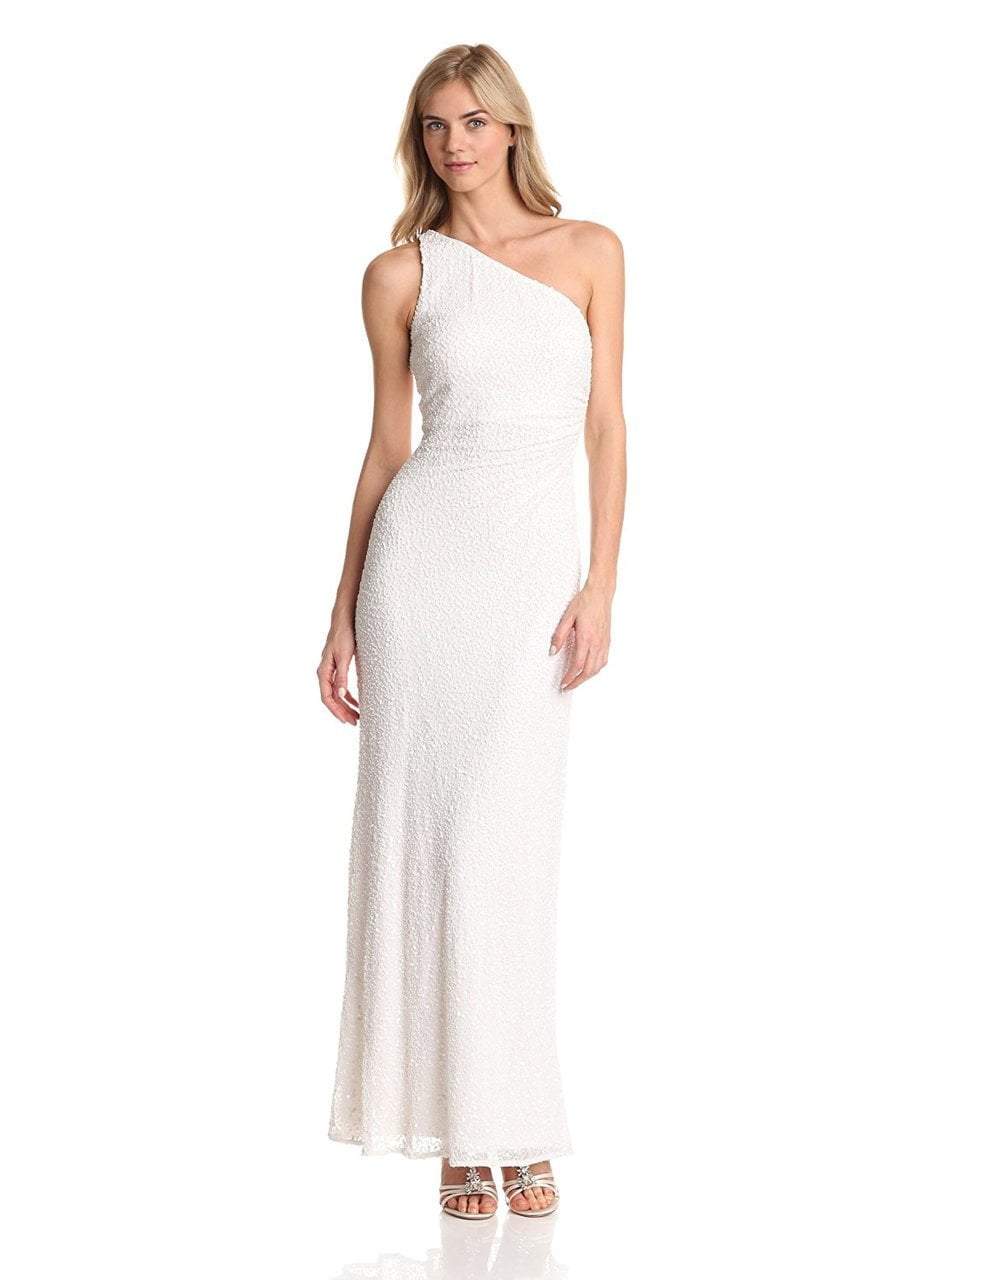 Adrianna Papell - Sequined Asymmetric Dress 91880950 in White